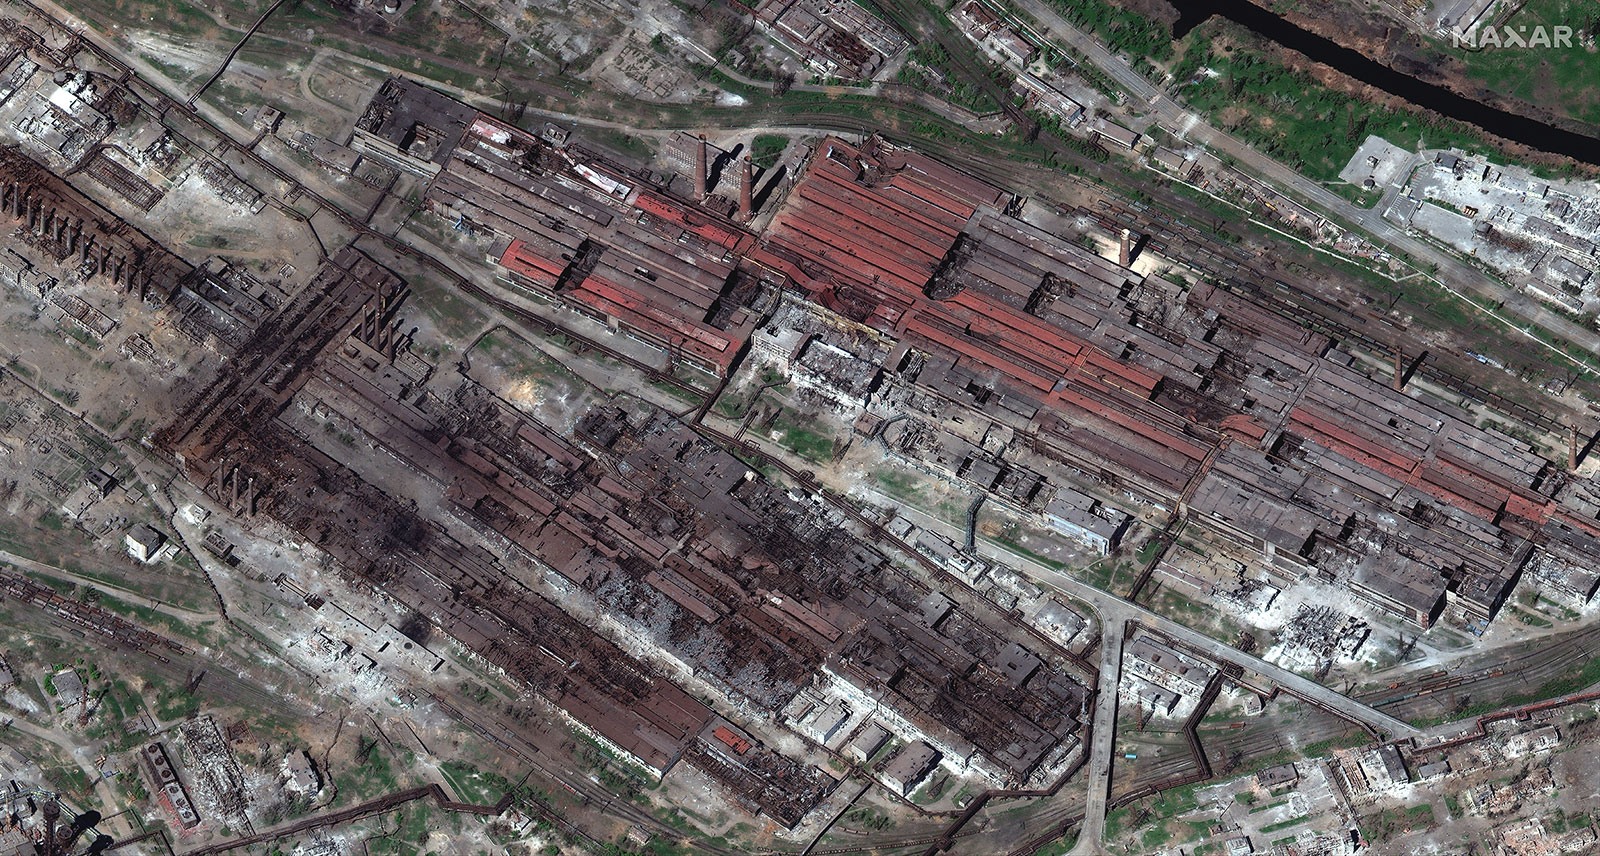 Satellite imagery shows what remains of the Azovstal steel plant in Mariupol, Ukraine, on April 29.